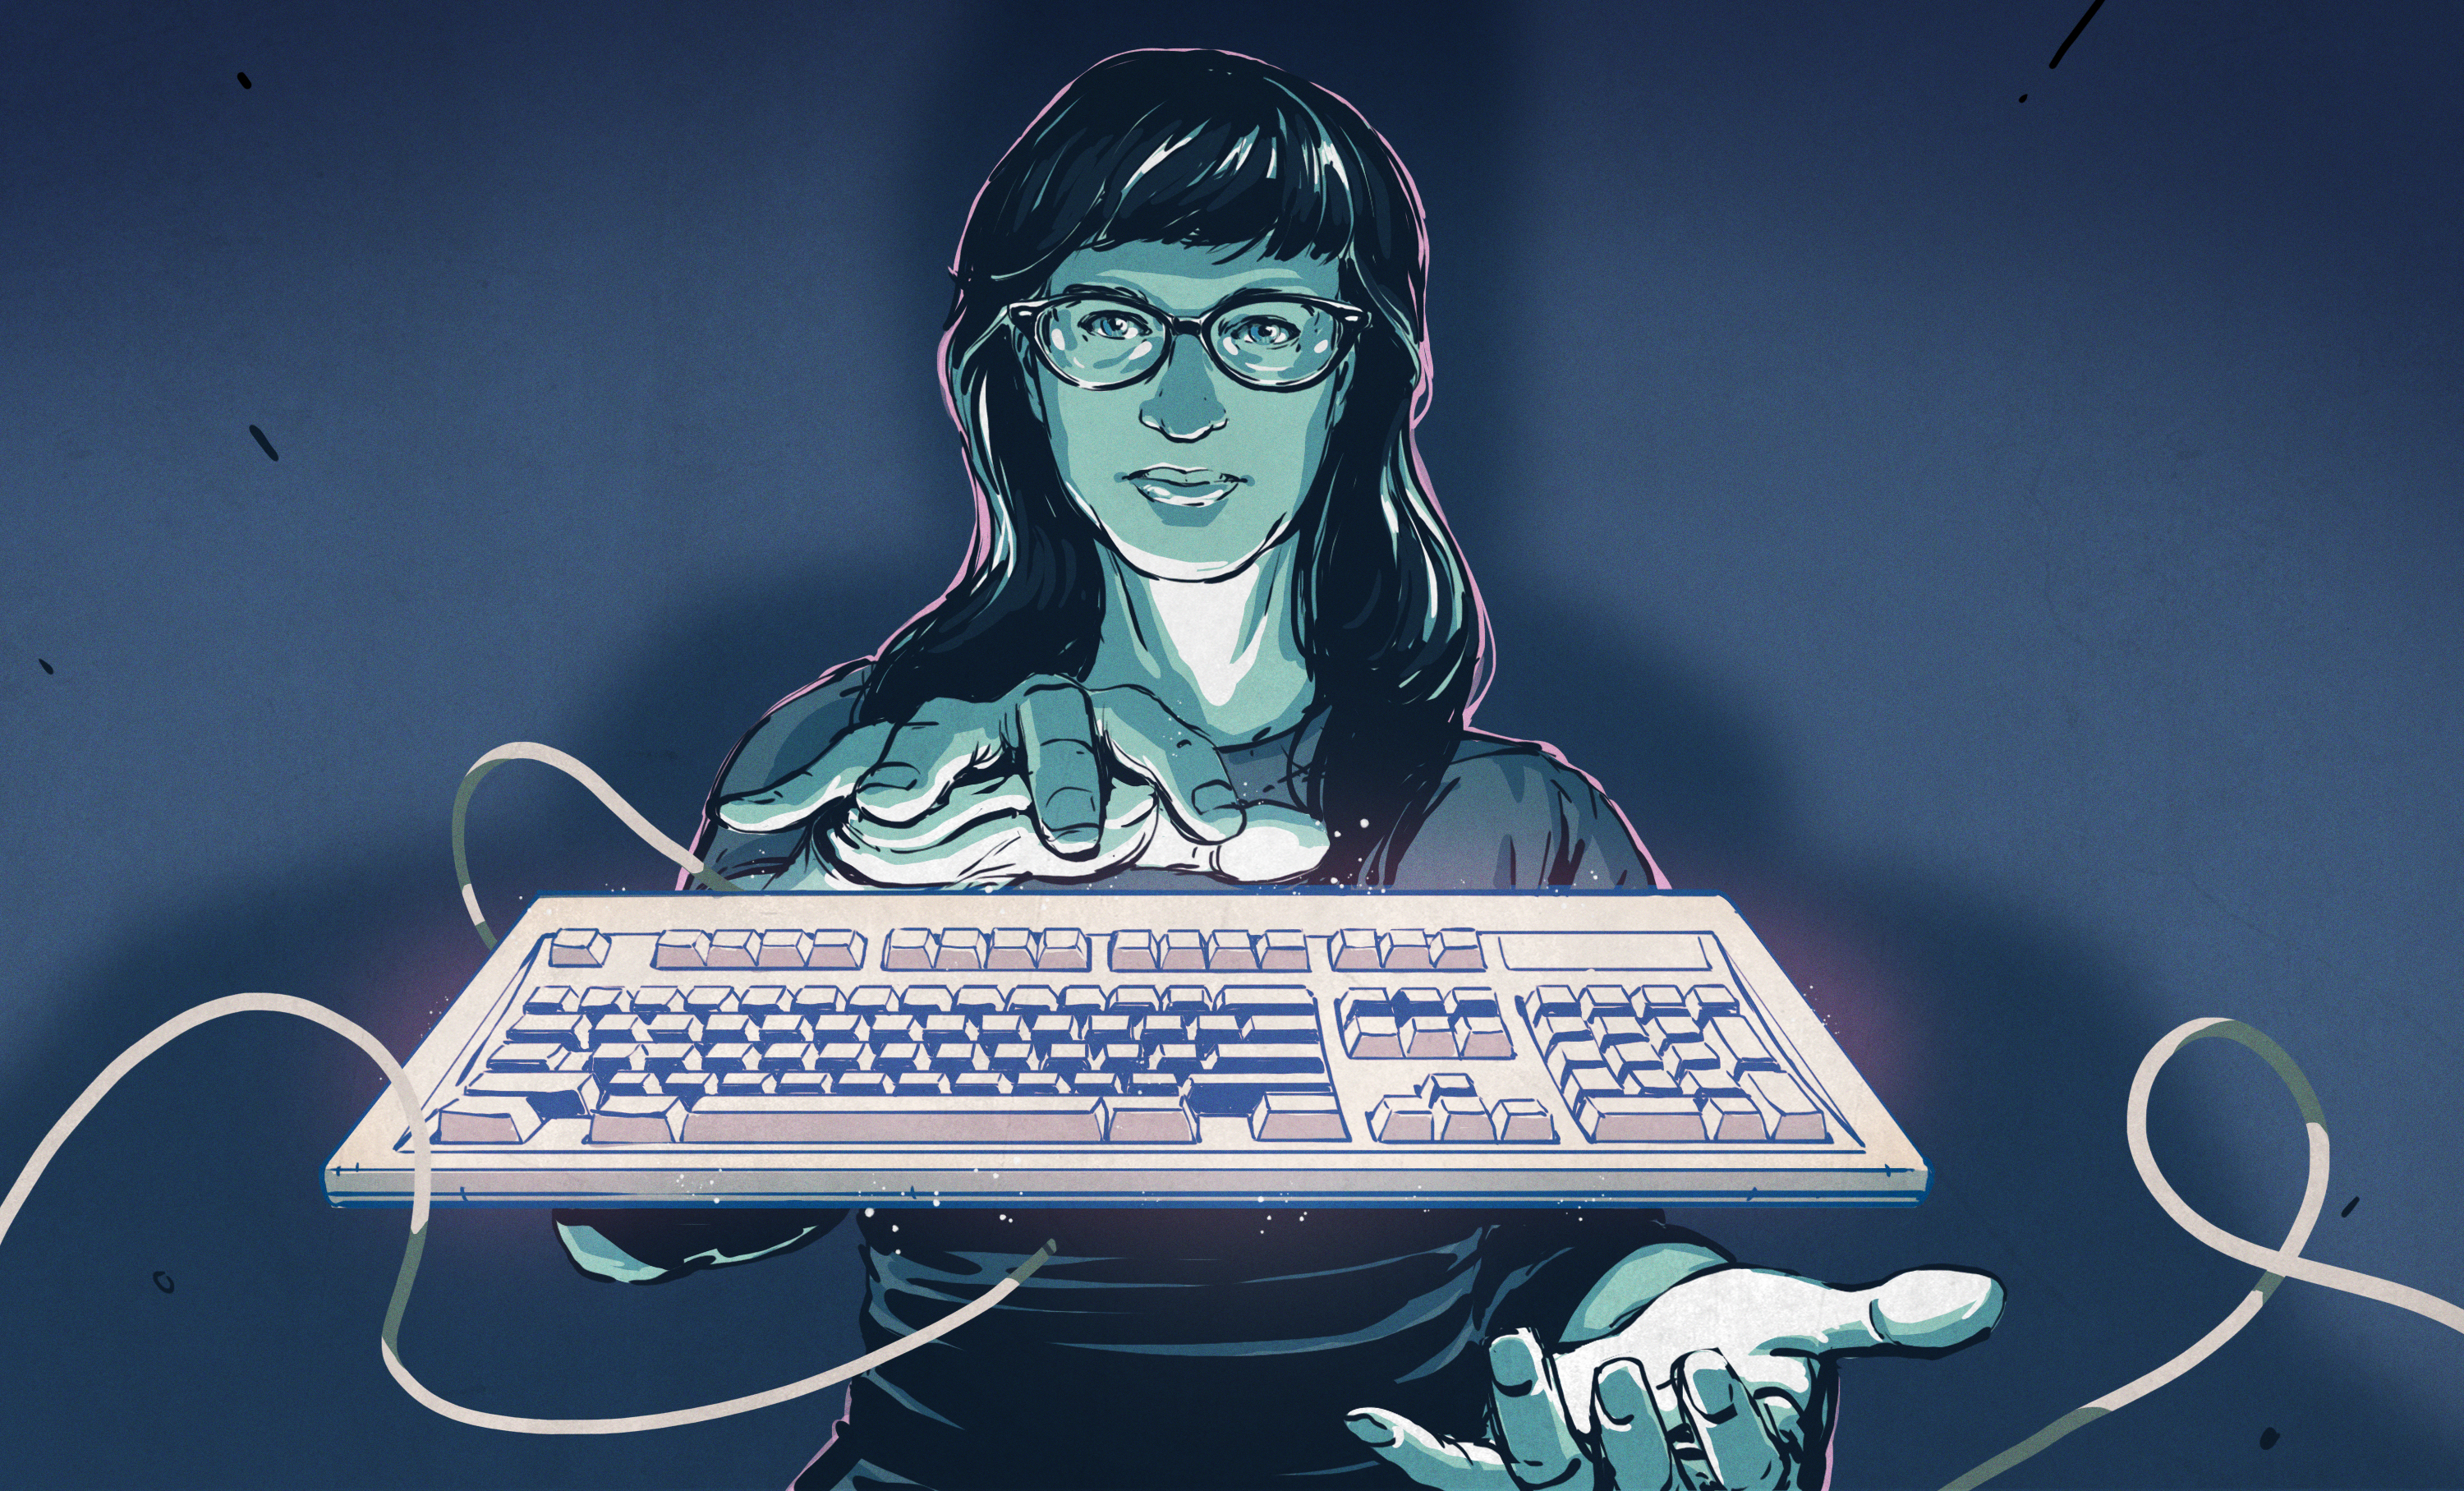 Illustrated Kristina with an IBM Model M keyboard floating between her hands.